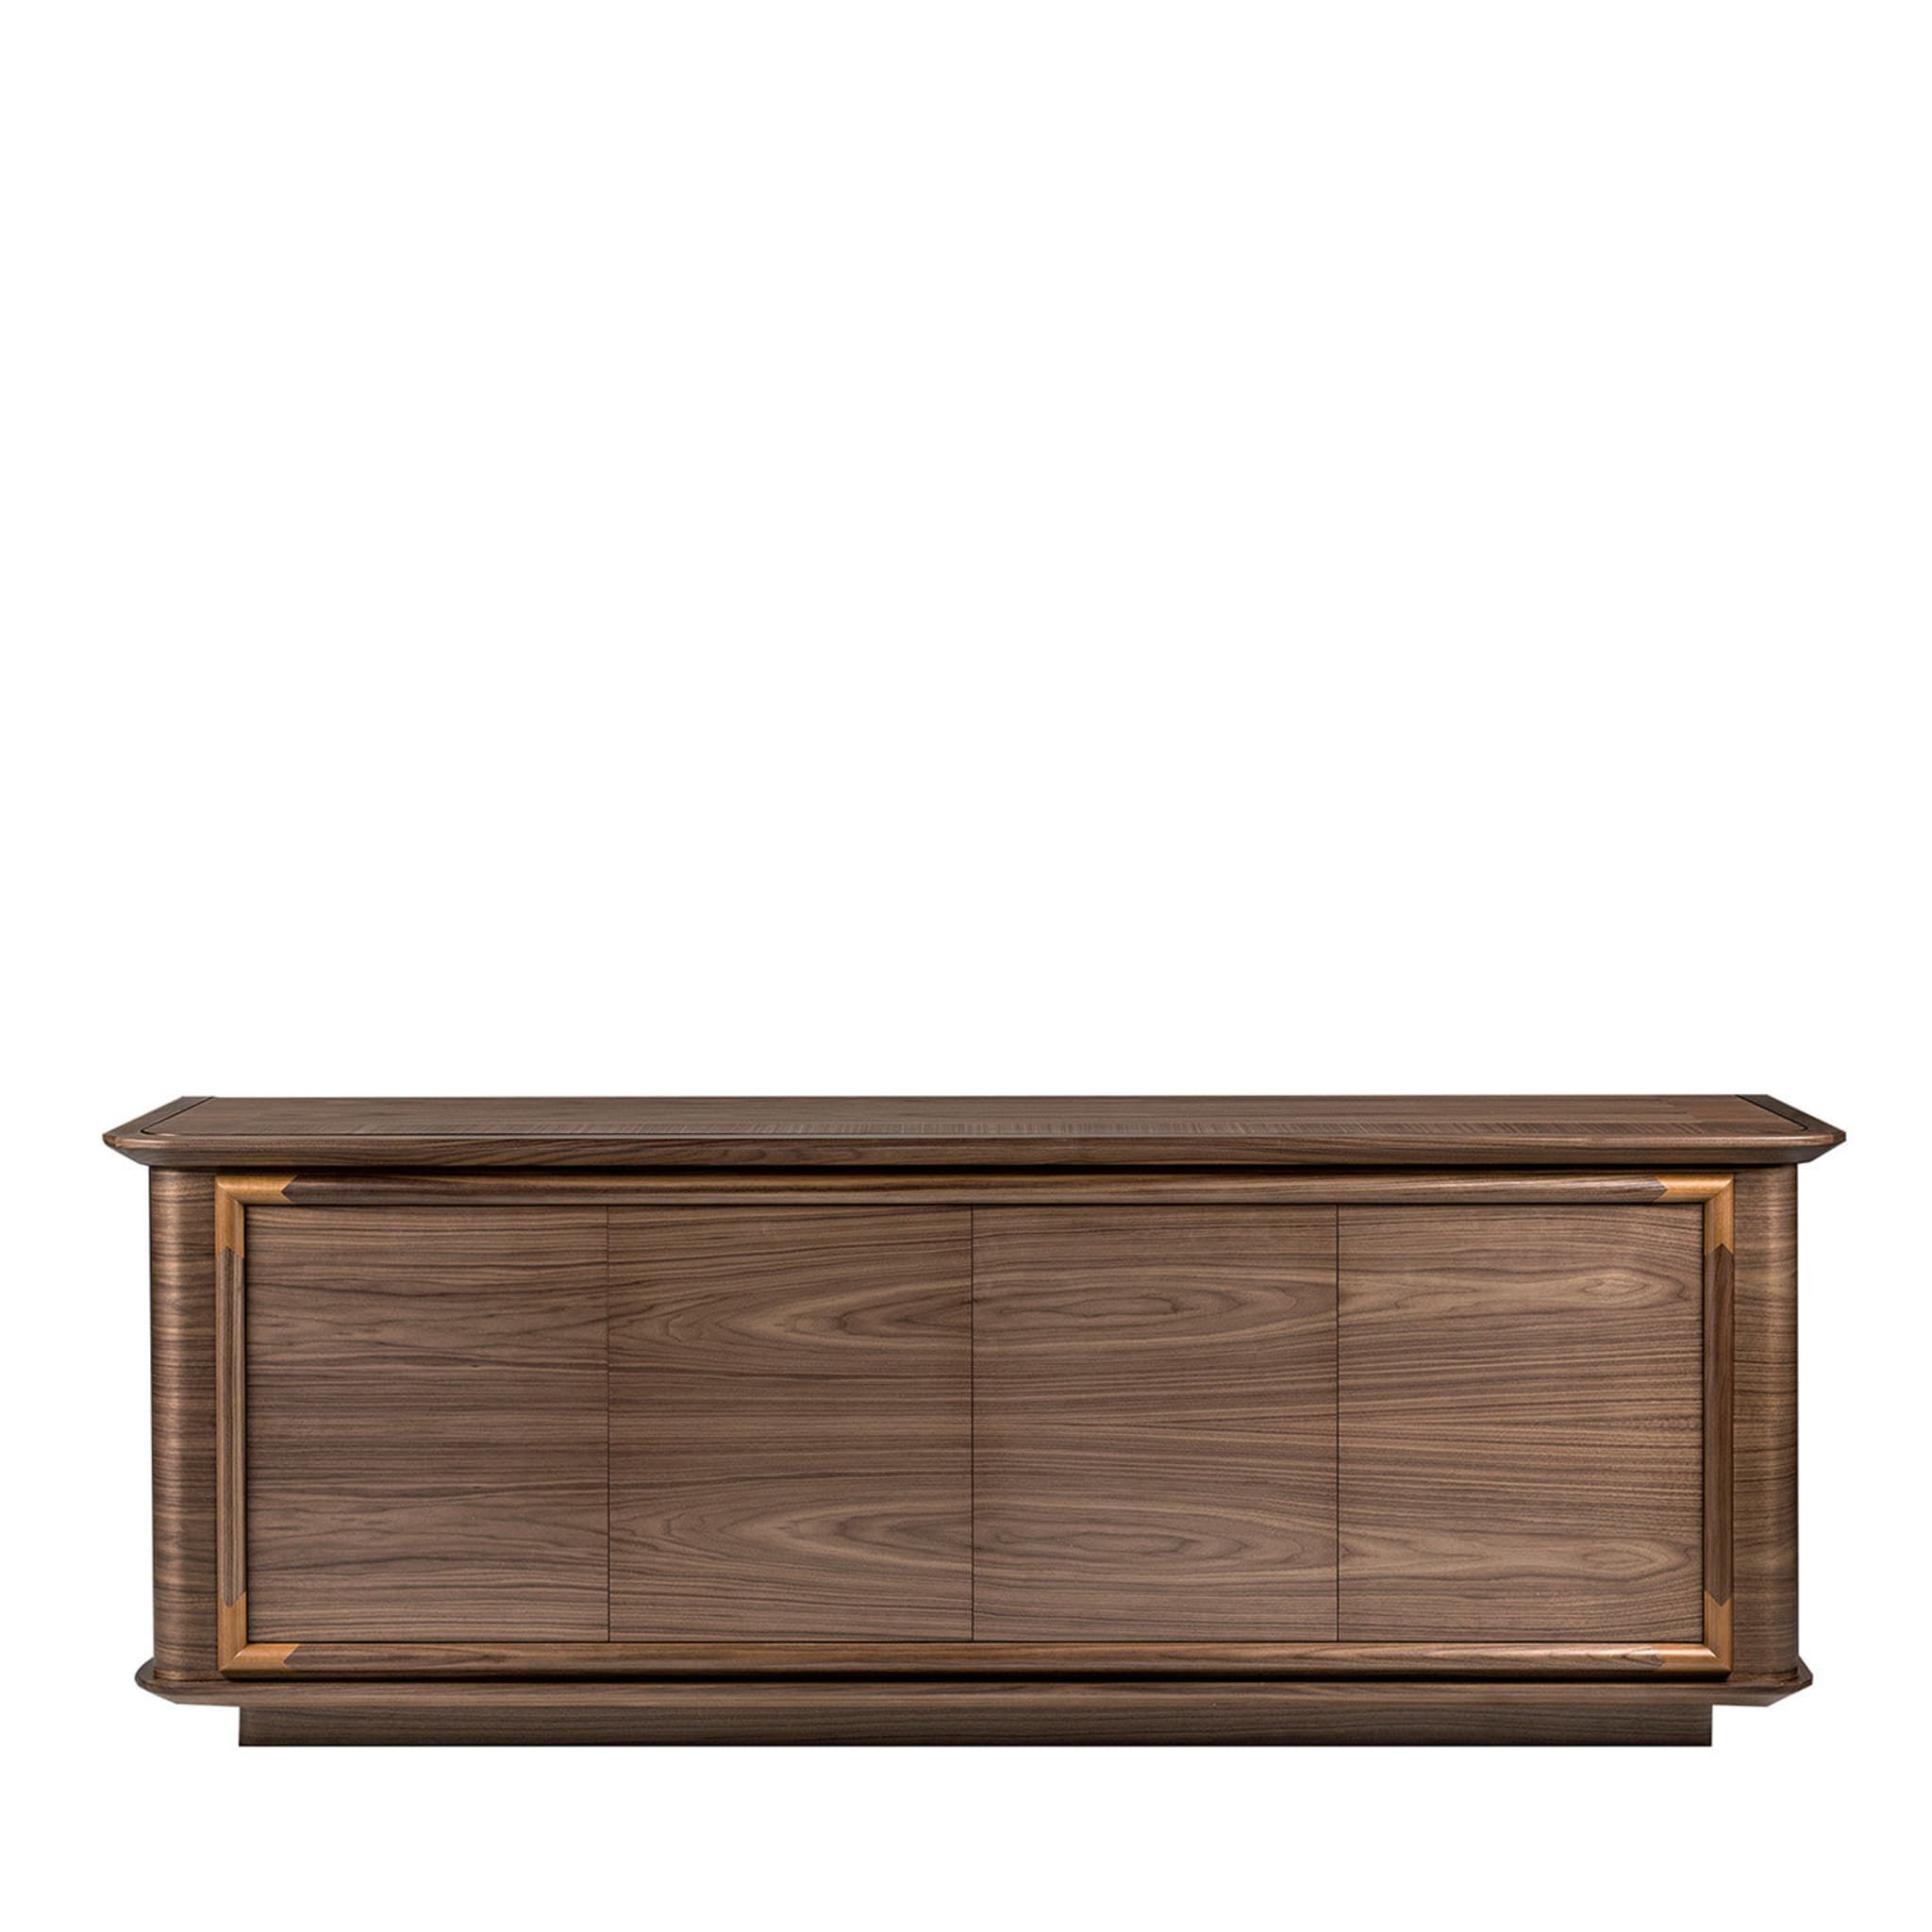 Gassa Sideboard by Luciano Colombo - Main view